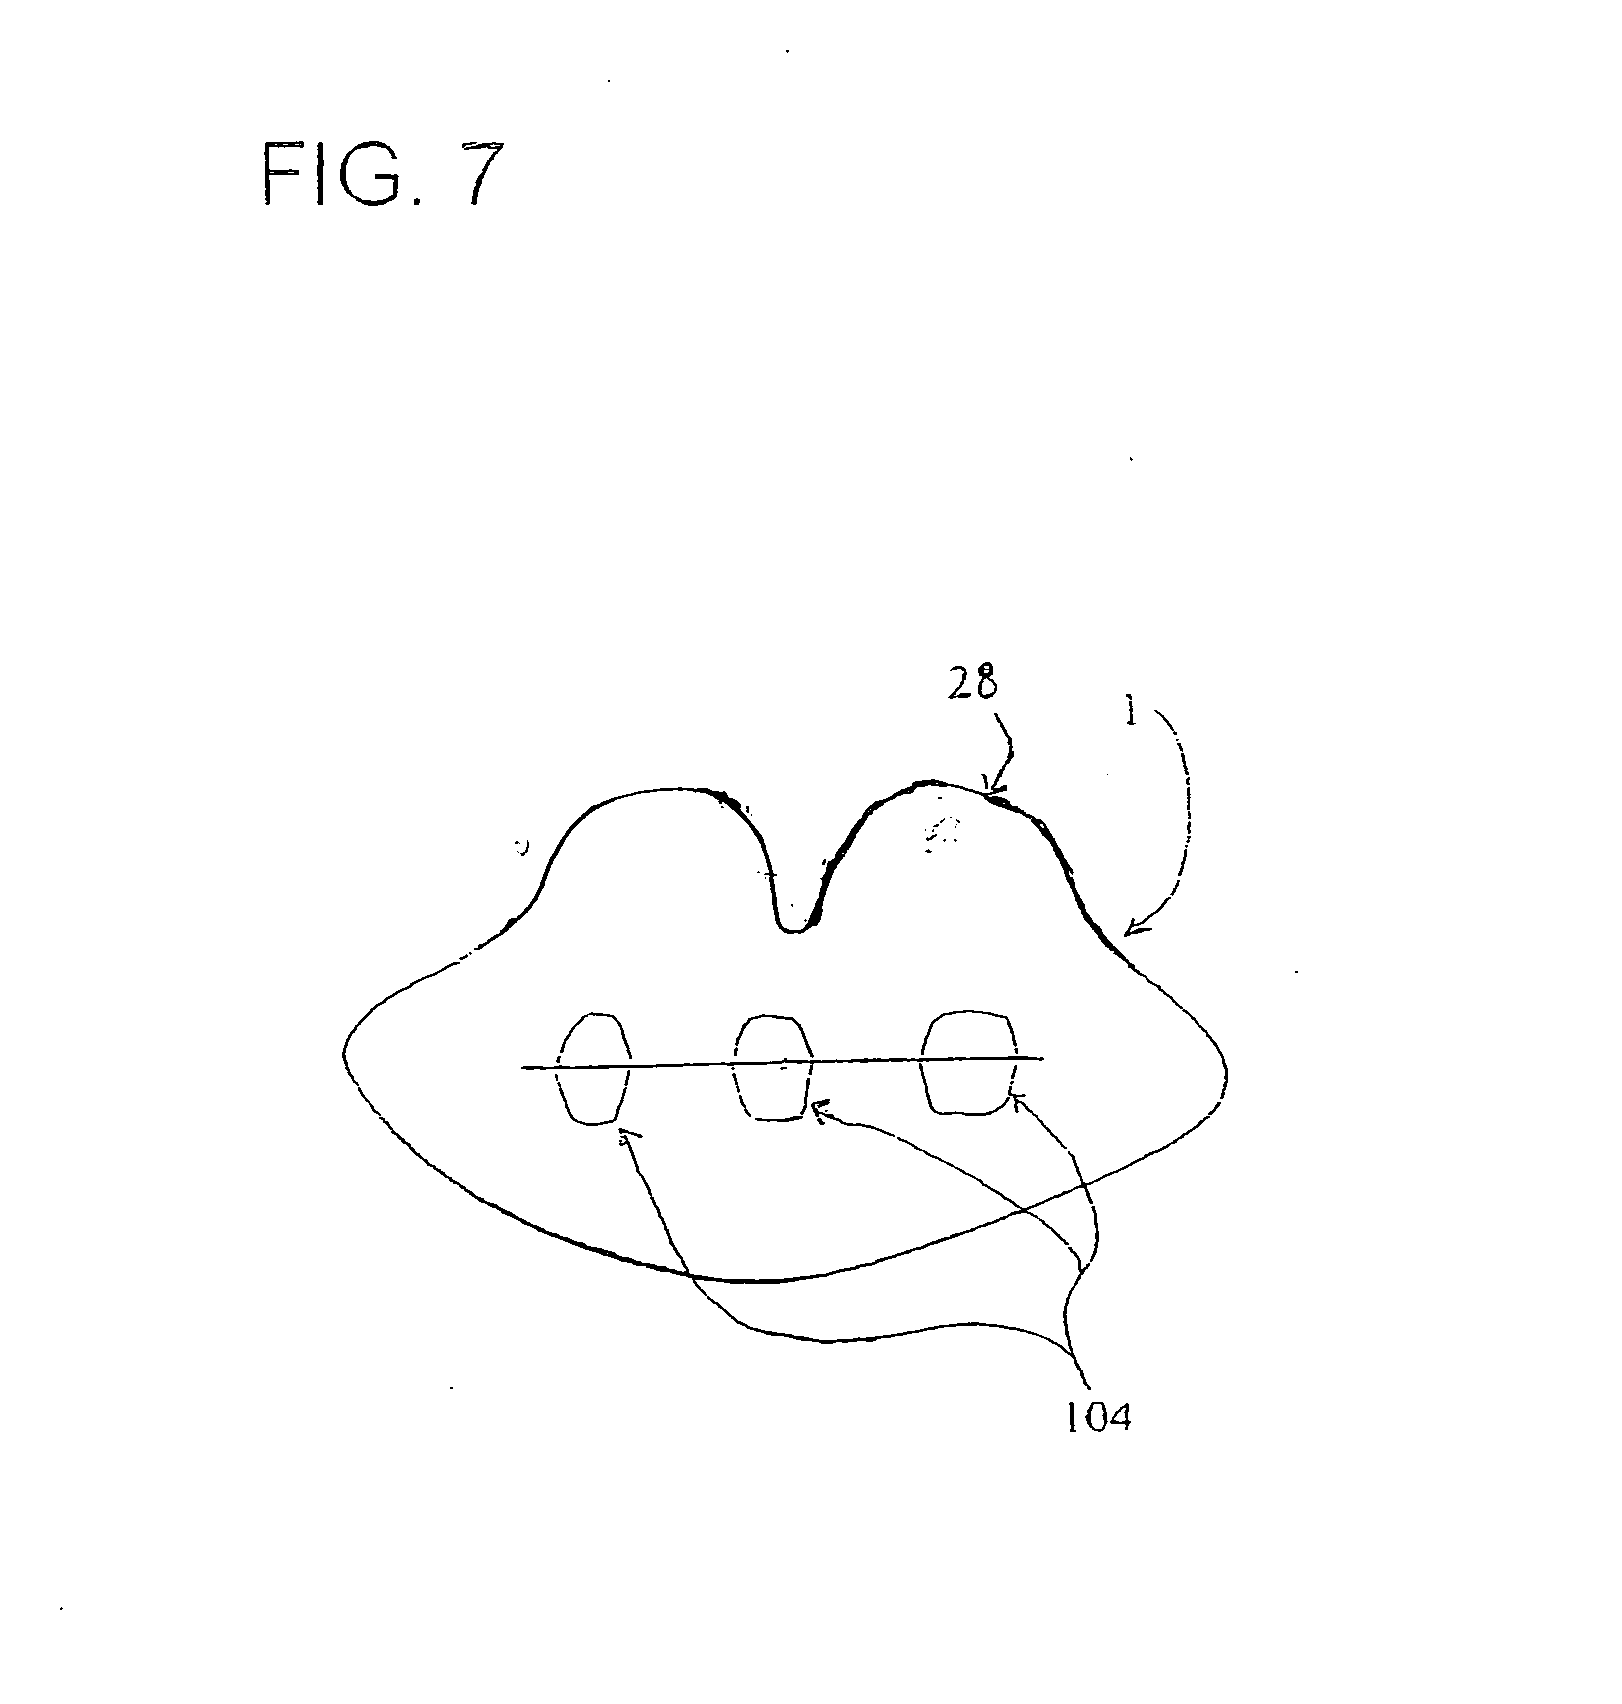 Appliance, system and method for preventing snoring